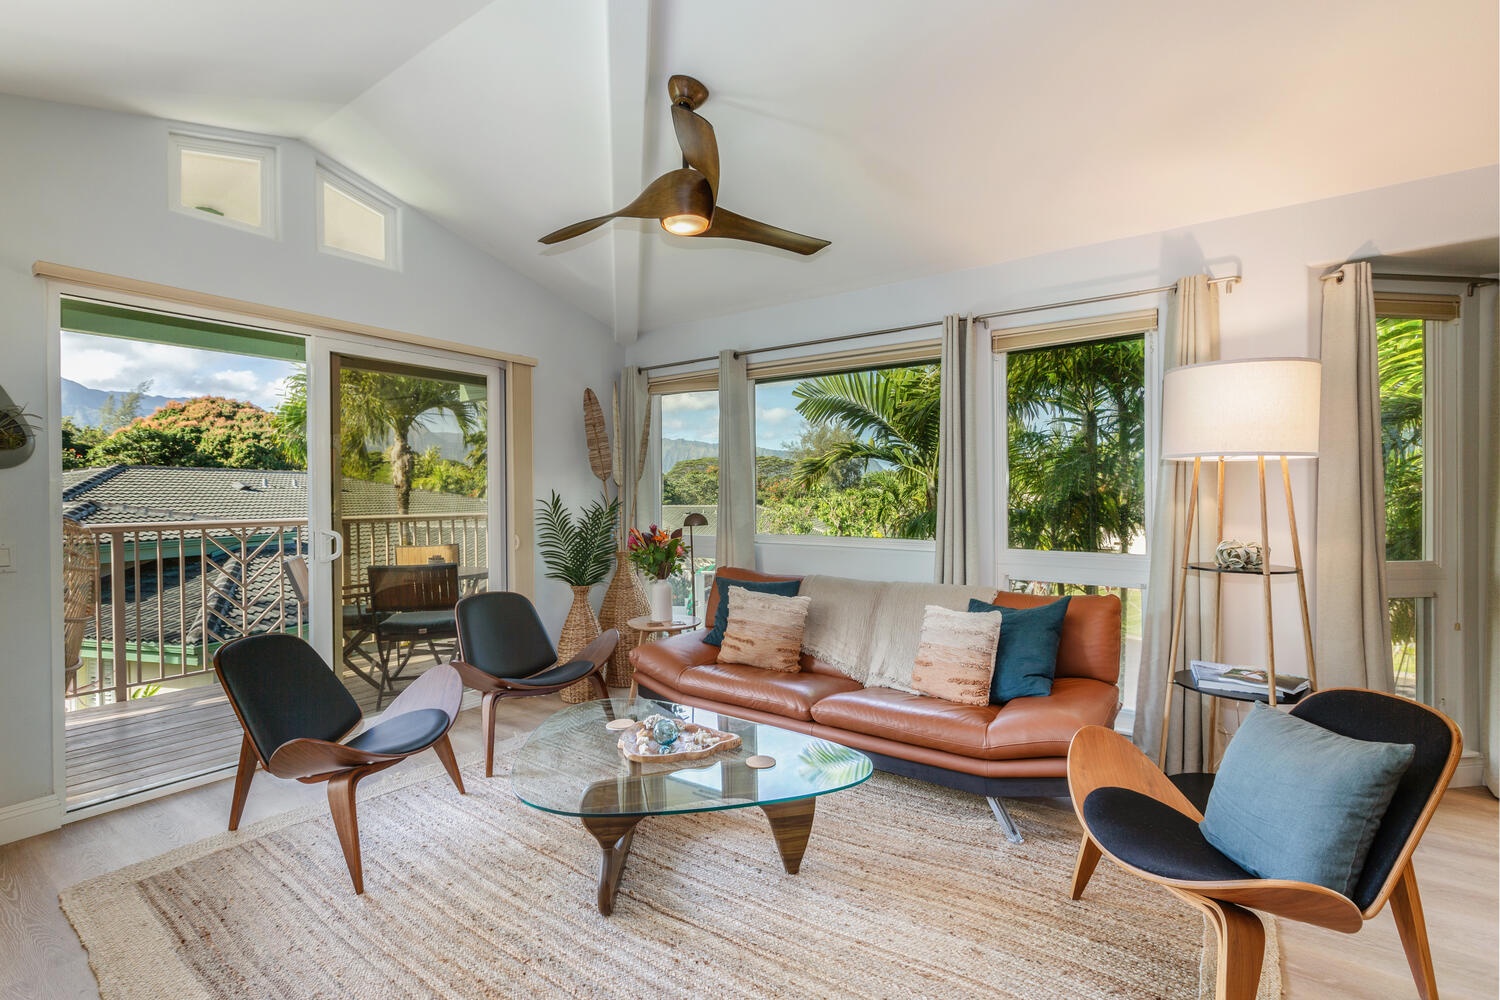 Princeville Vacation Rentals, Sea Glass - Cozy living area with plenty of seats and direct access to the lanai.